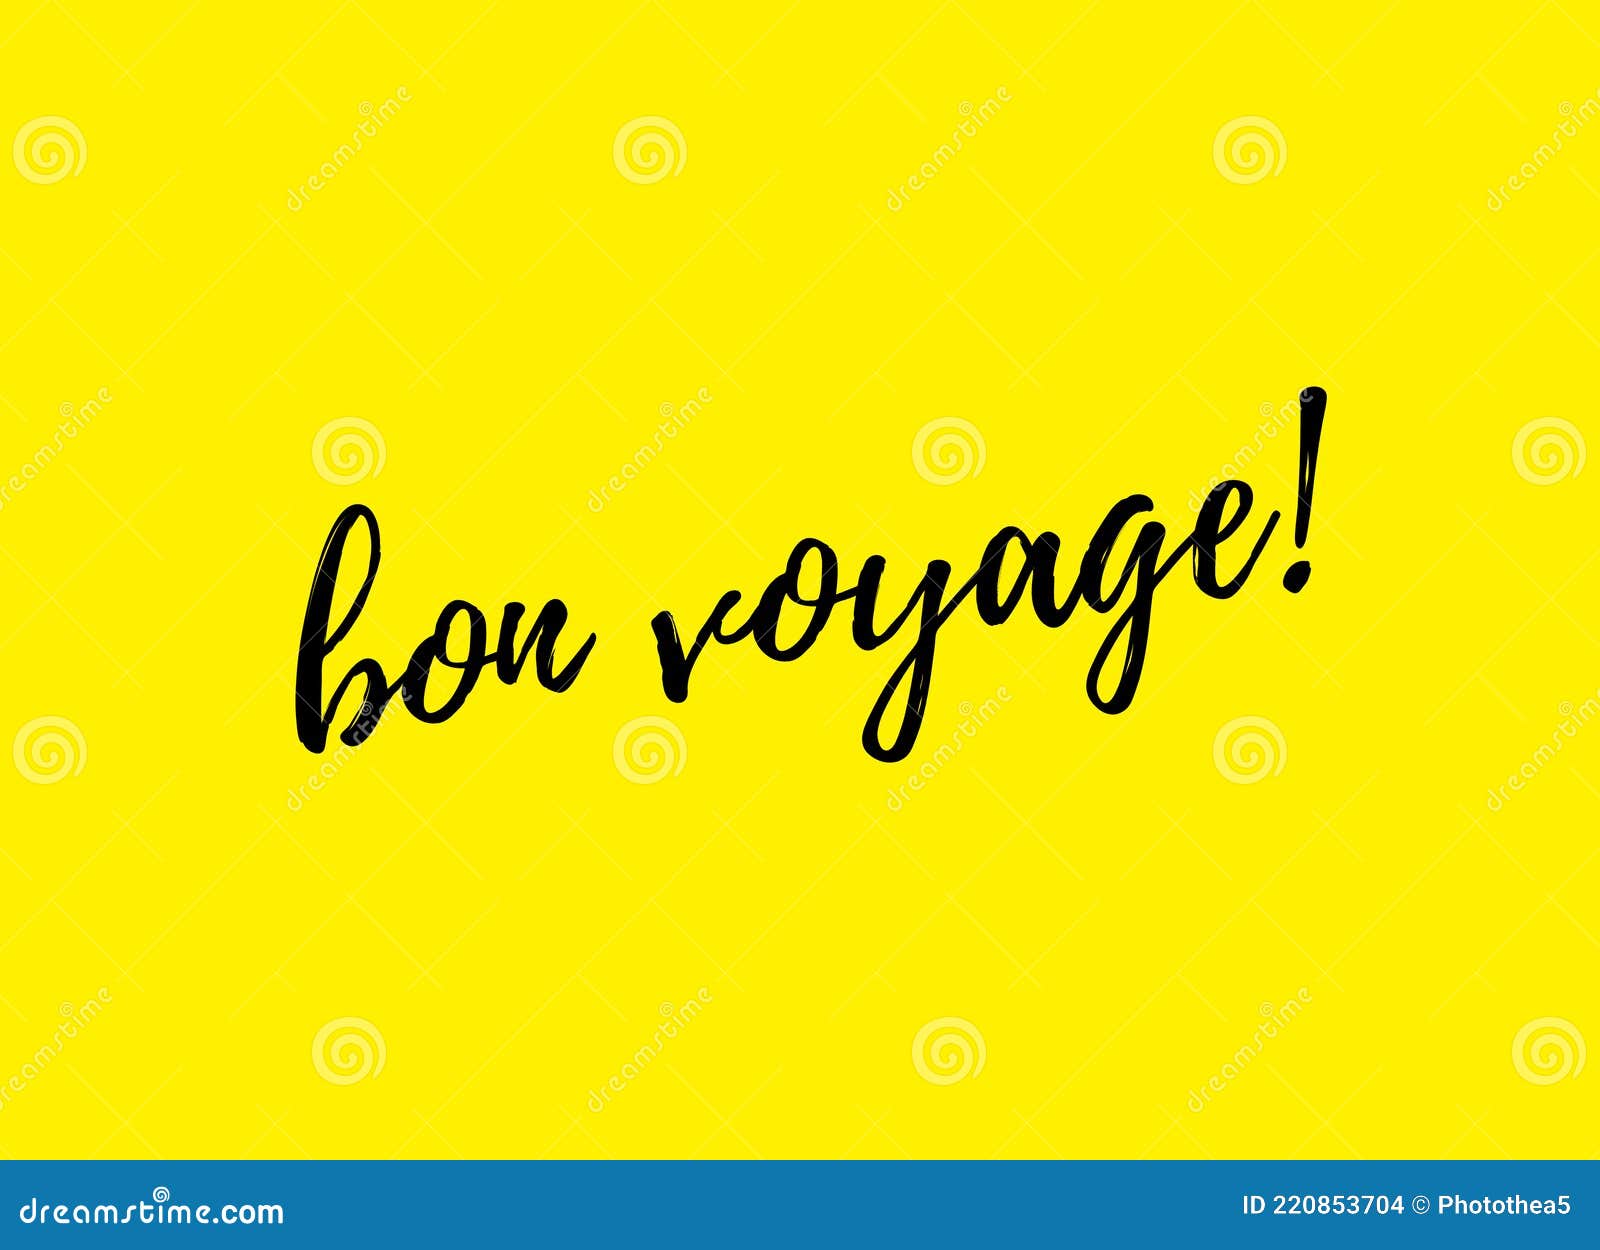 bon voyage in french meaning